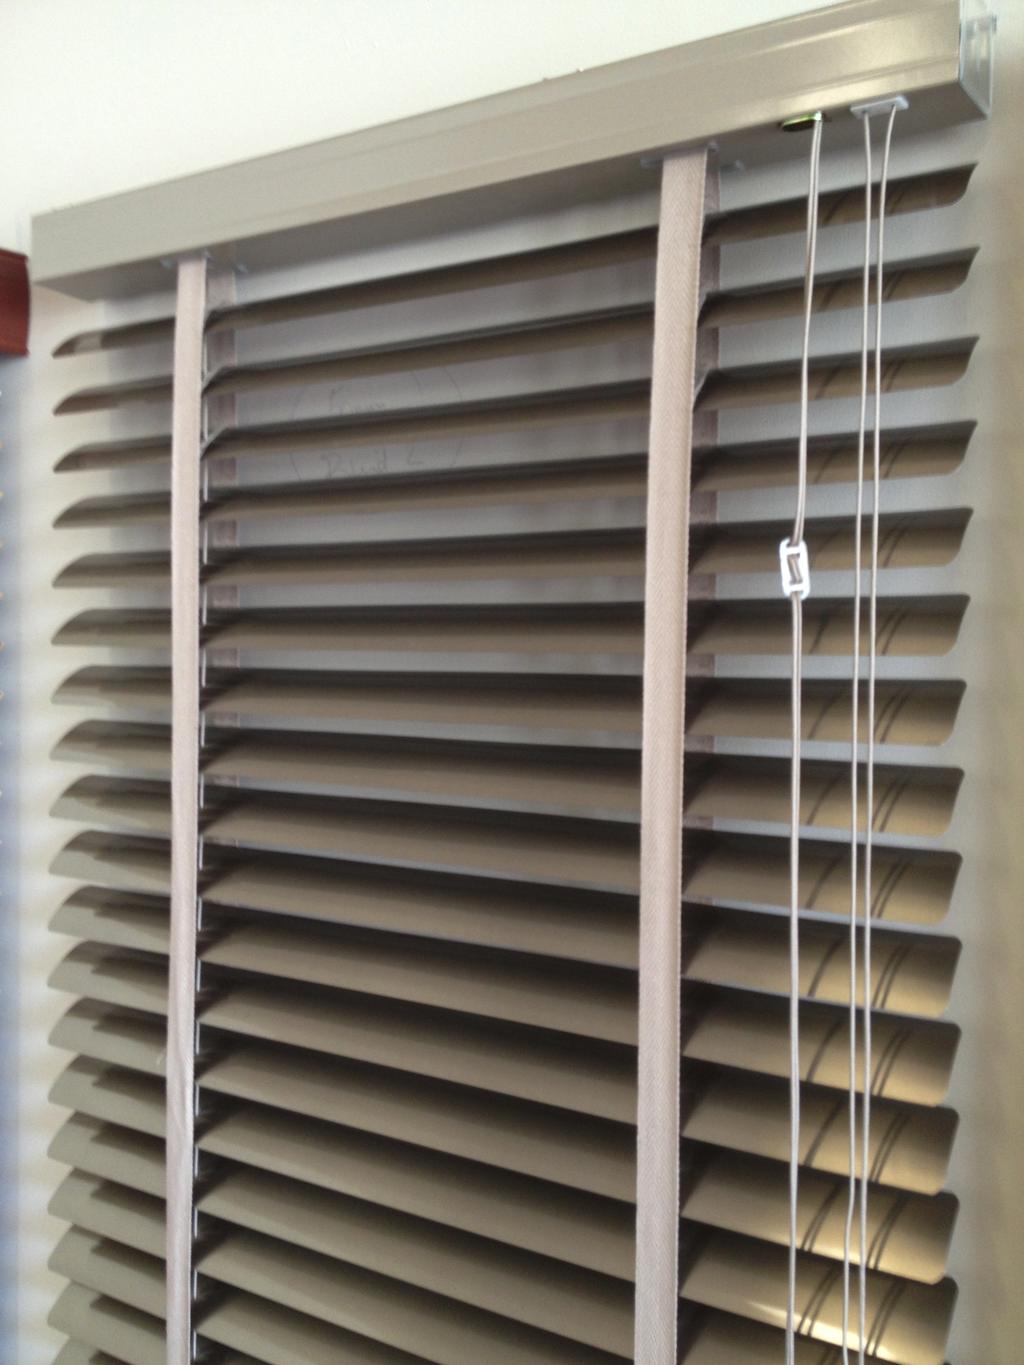 15mm, 25mm Slimline AluminiumVenetians & 50mm Venetians 50% OFF NOW! Perth Design blinds only Slimlines are most common in 25mm but are also available in 15mm.